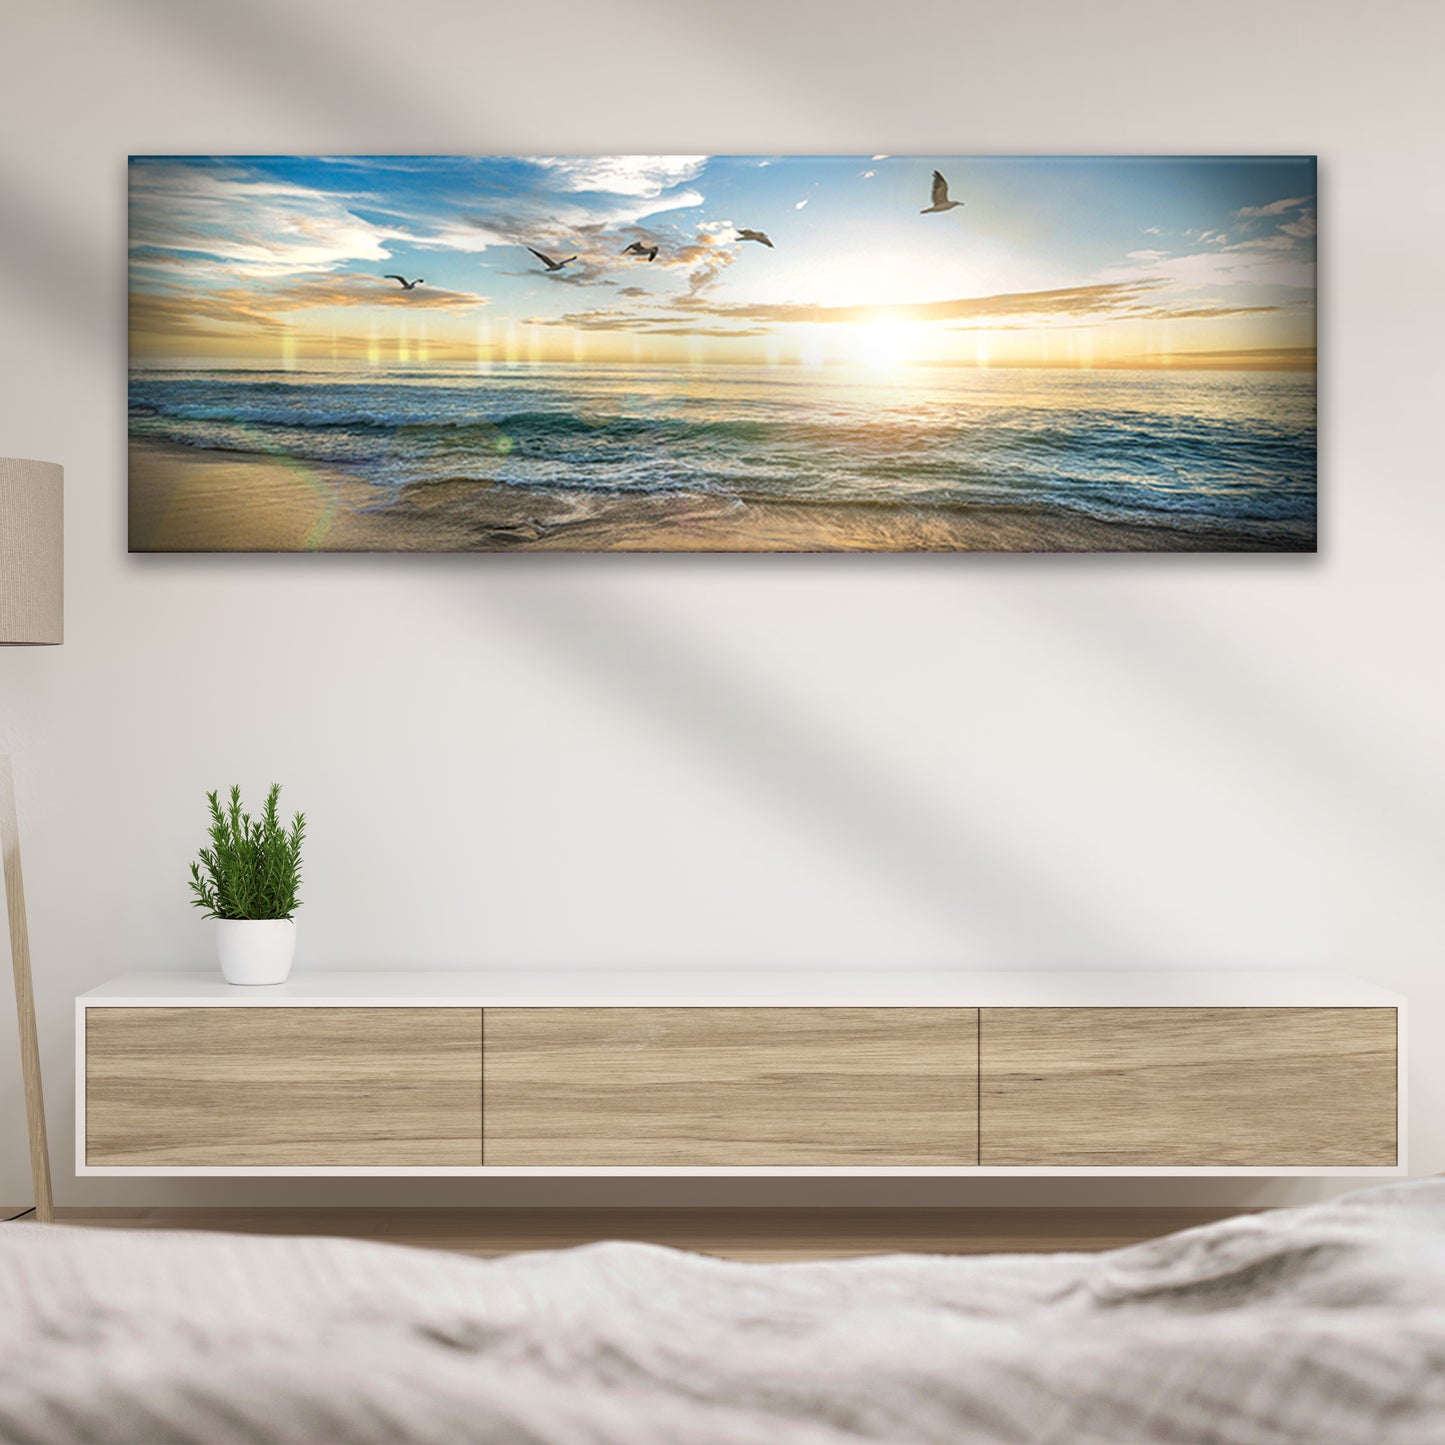 Gulf Coast At Sunset Canvas Wall Art Style 2 - Image by Tailored Canvases